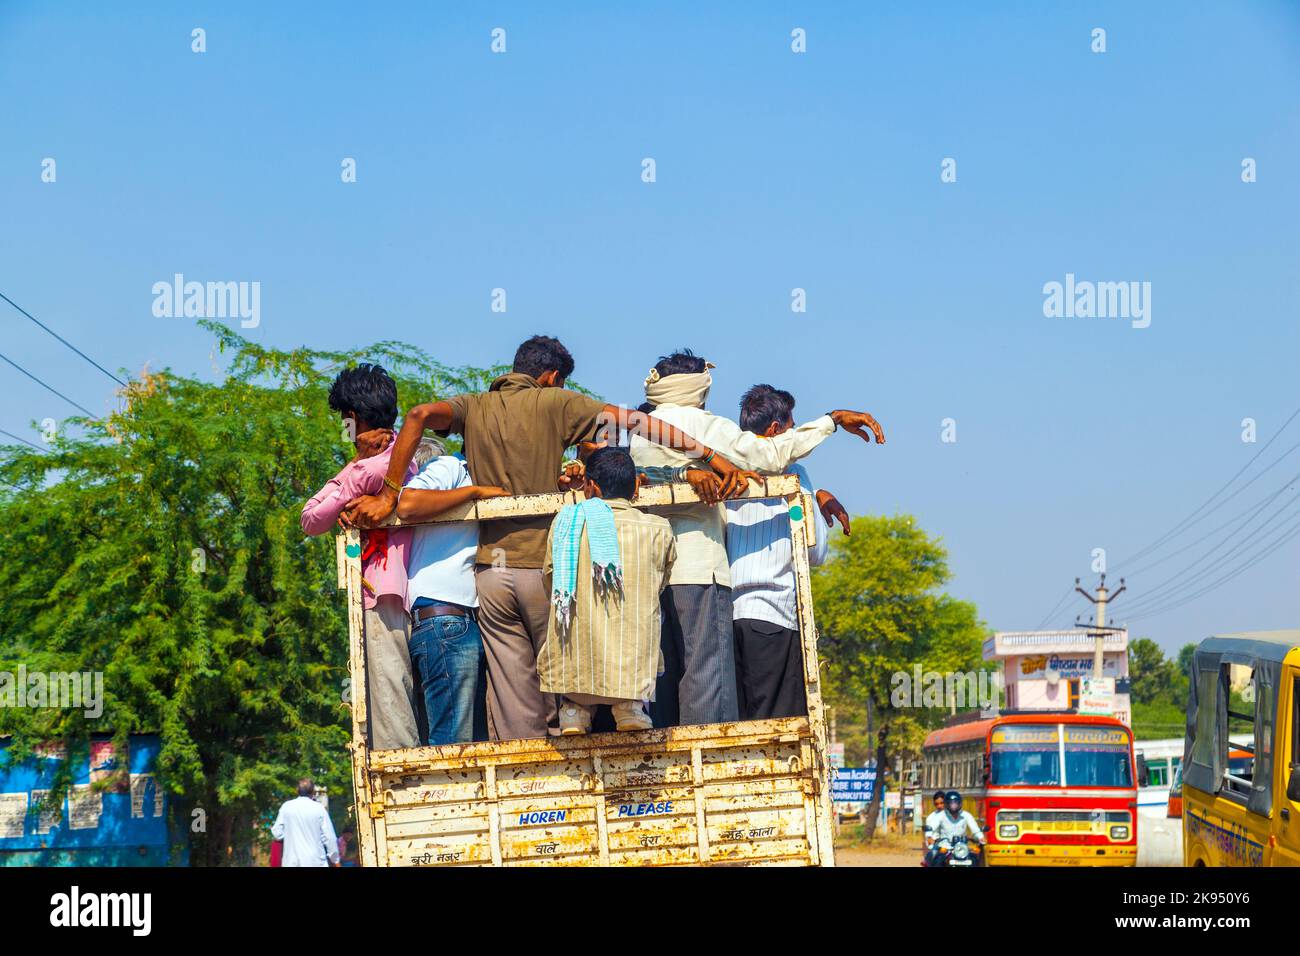 Daola, India - October 25, 2012: people on highway 71 in overloaded truck in Daoloa, India. Overload ist the most dangerous reason for car accidents. Stock Photo